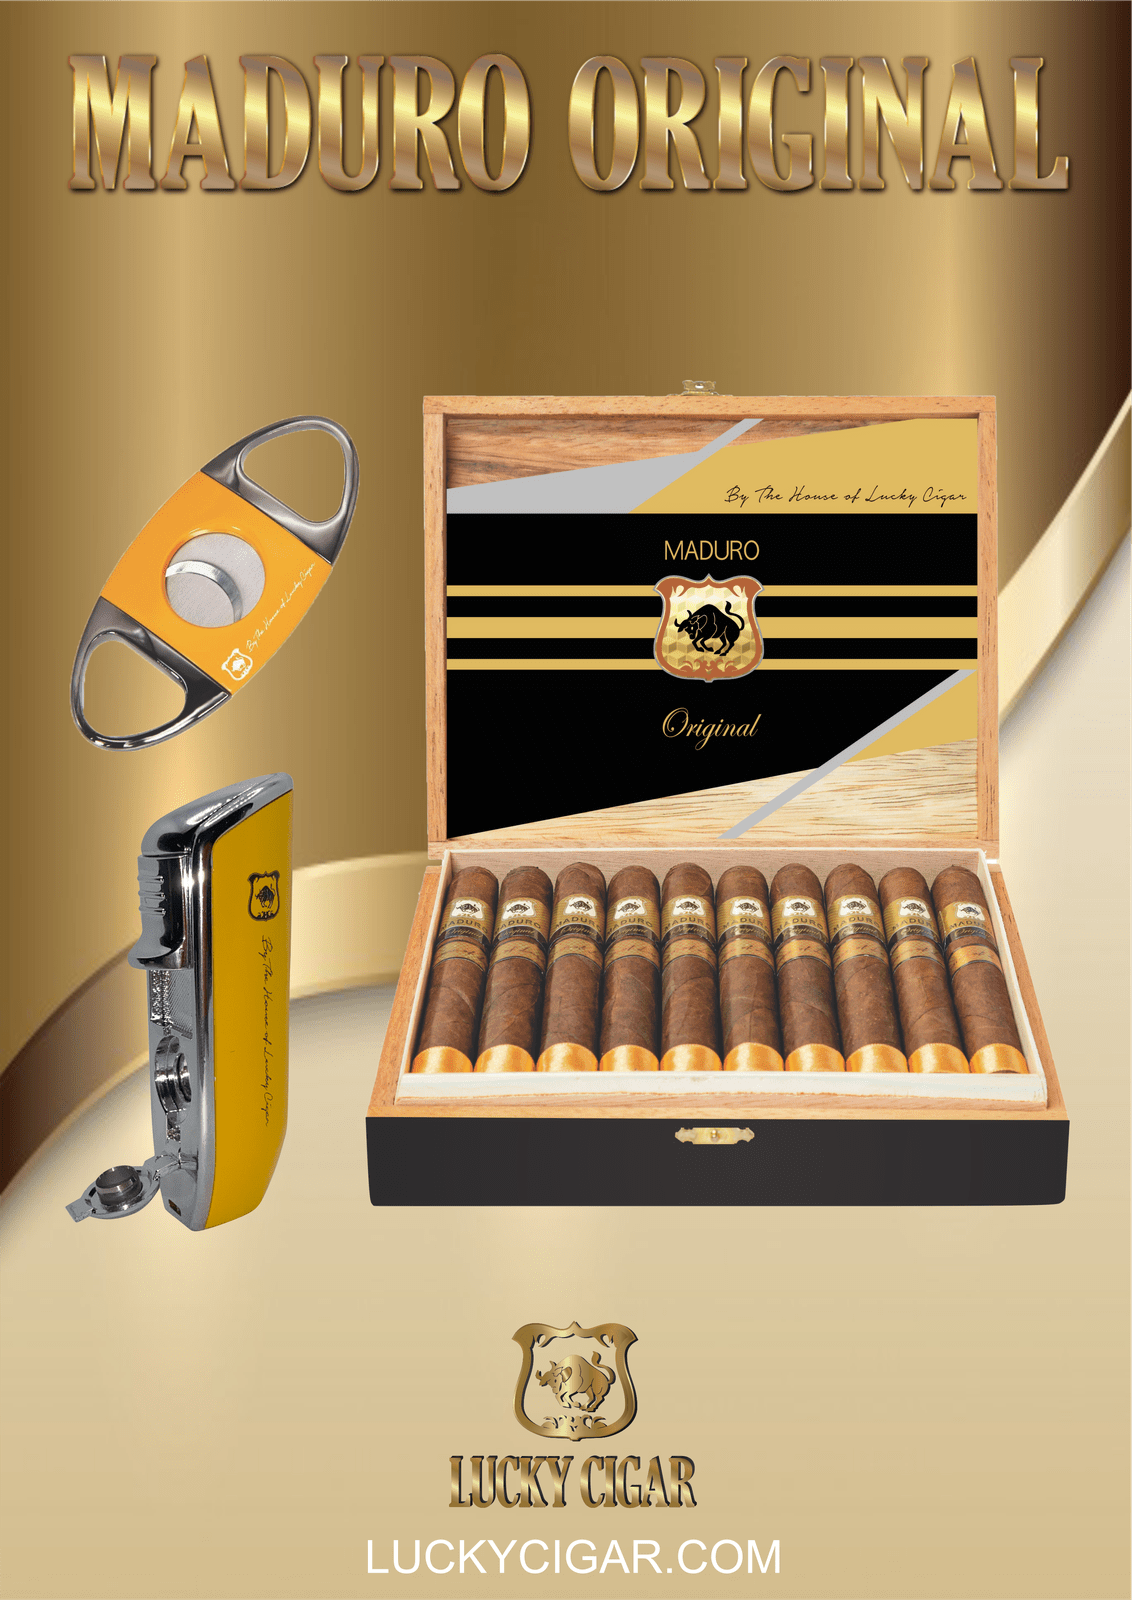 Lucky Cigar Sampler Sets: Set of Box Maduro Original Robusto Cigars with Torch, Cutter